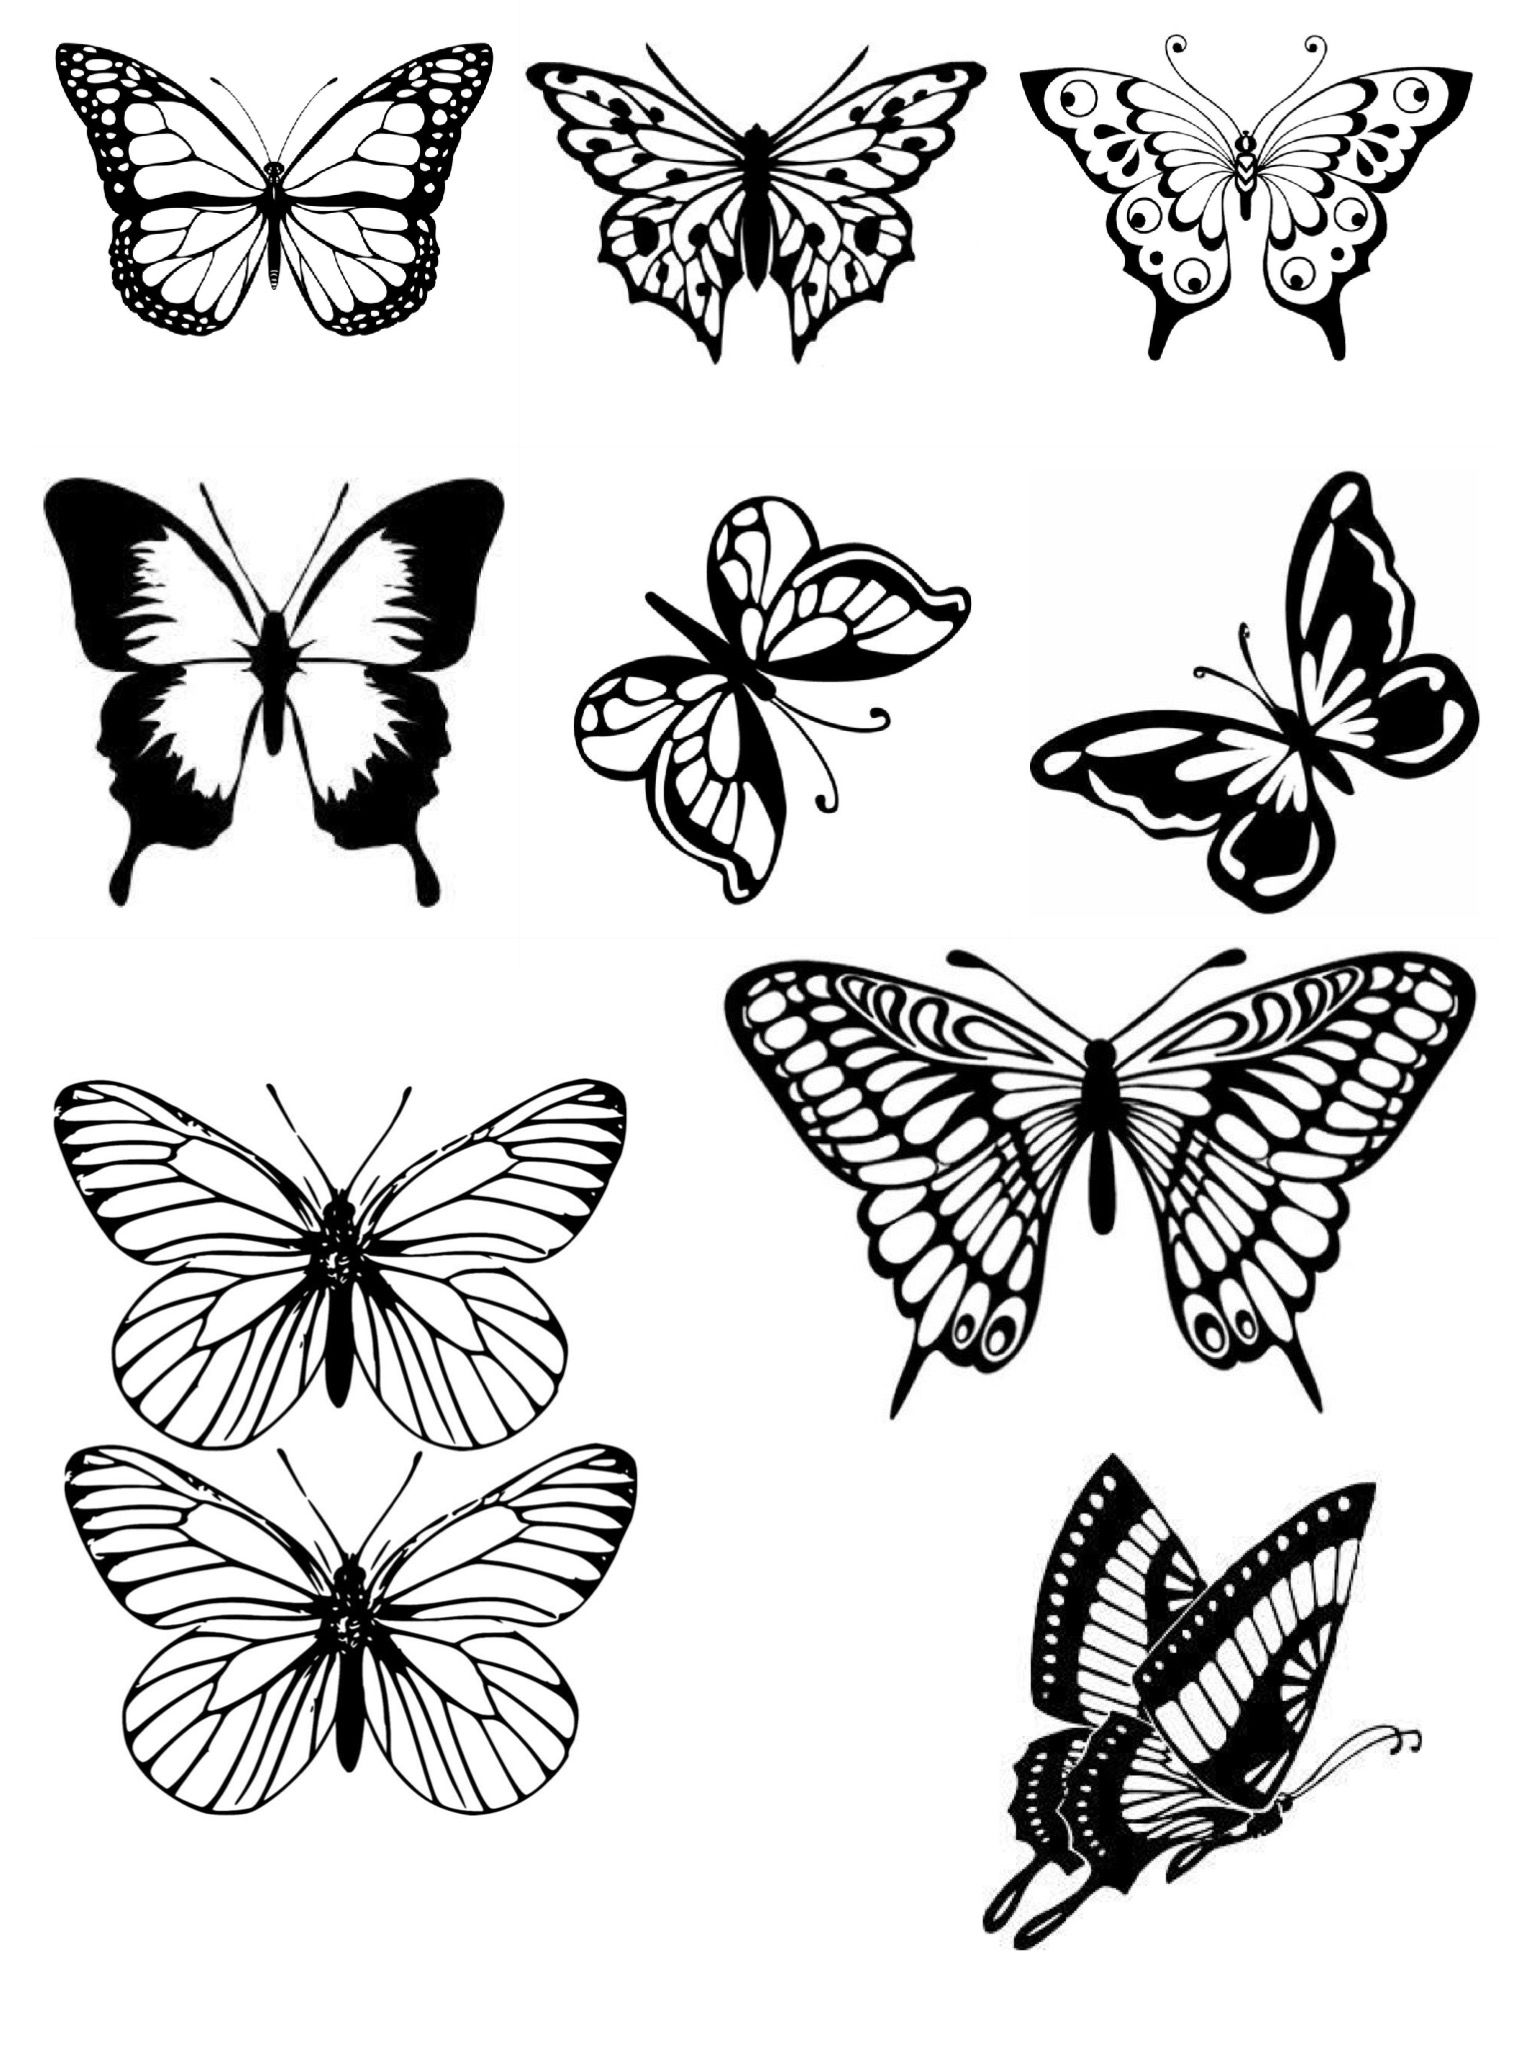 Butterfly Wings Drawing Stunning Sketch